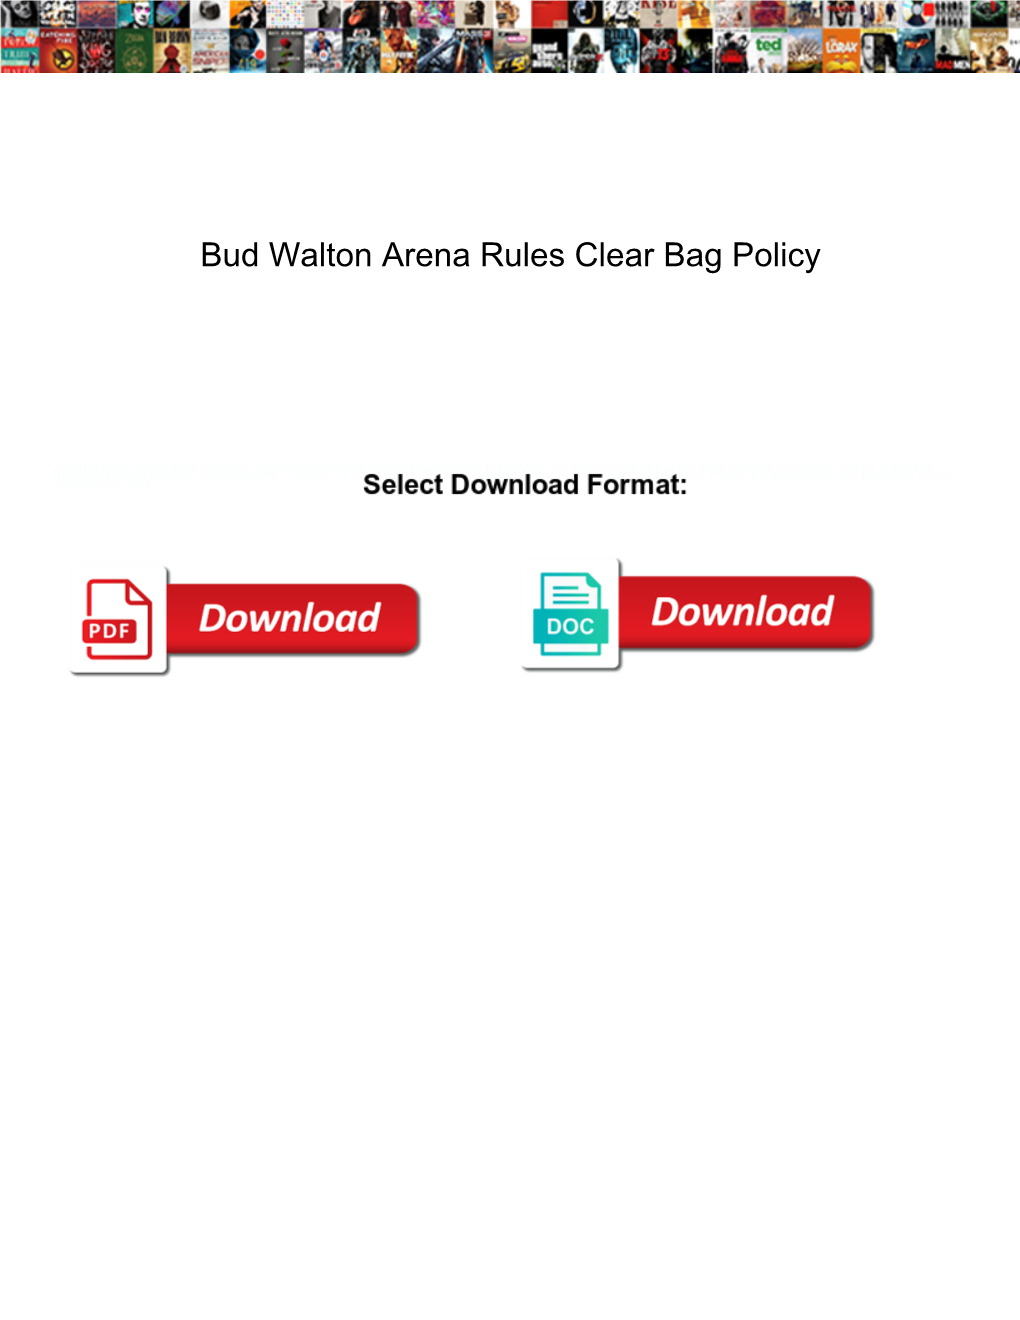 Bud Walton Arena Rules Clear Bag Policy